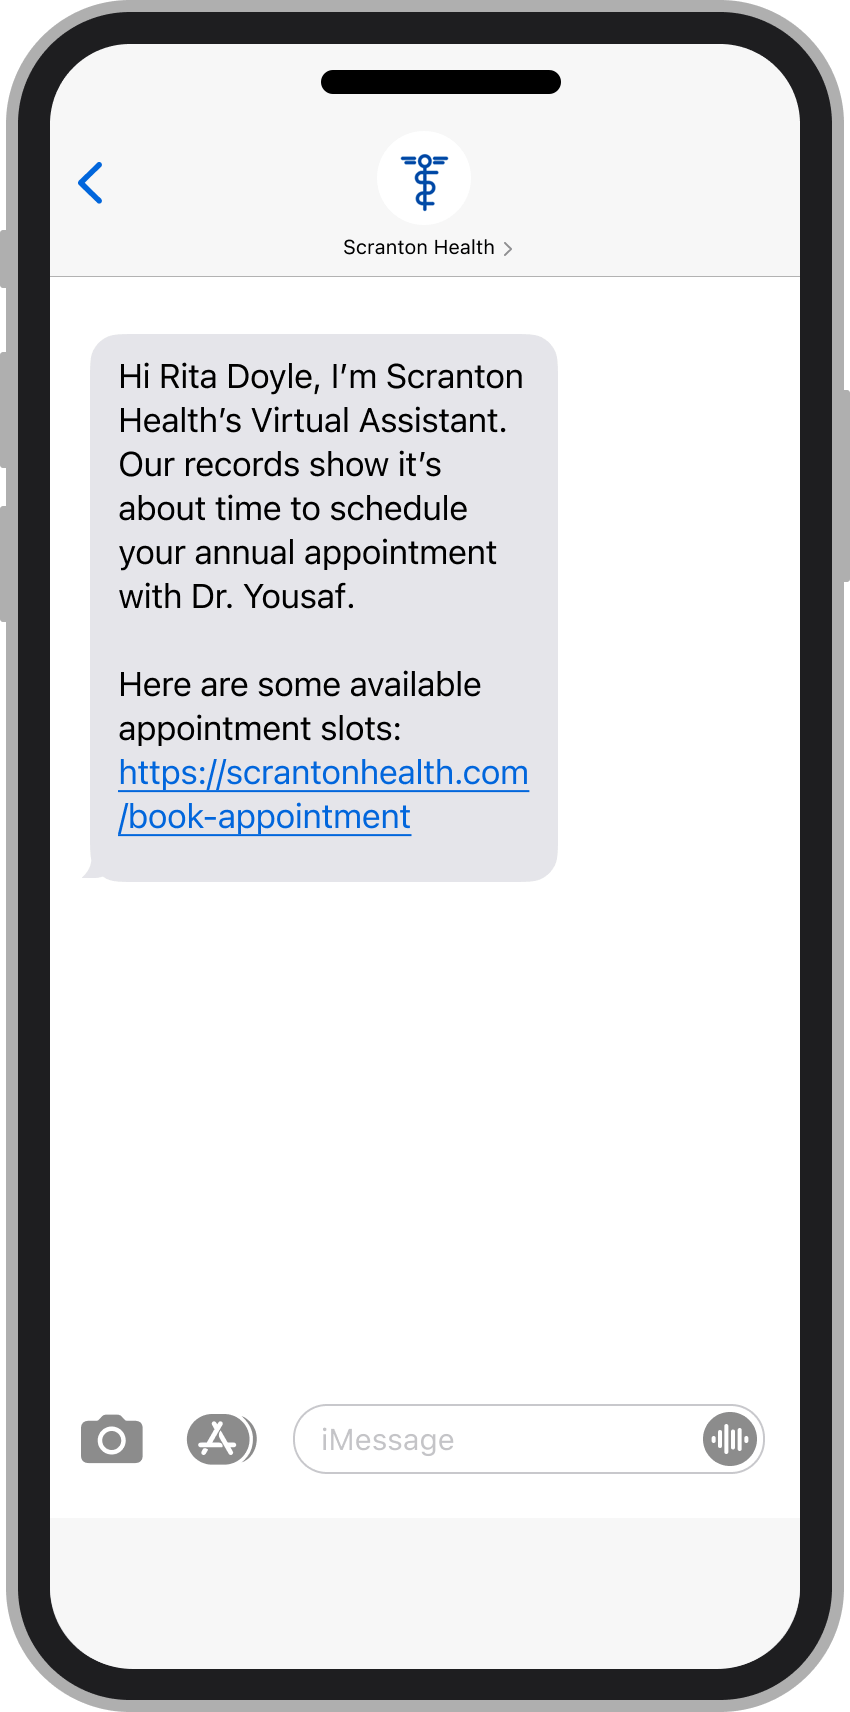 A phone with a text message from a virtual assistant reminding the user to schedule an annual appointment